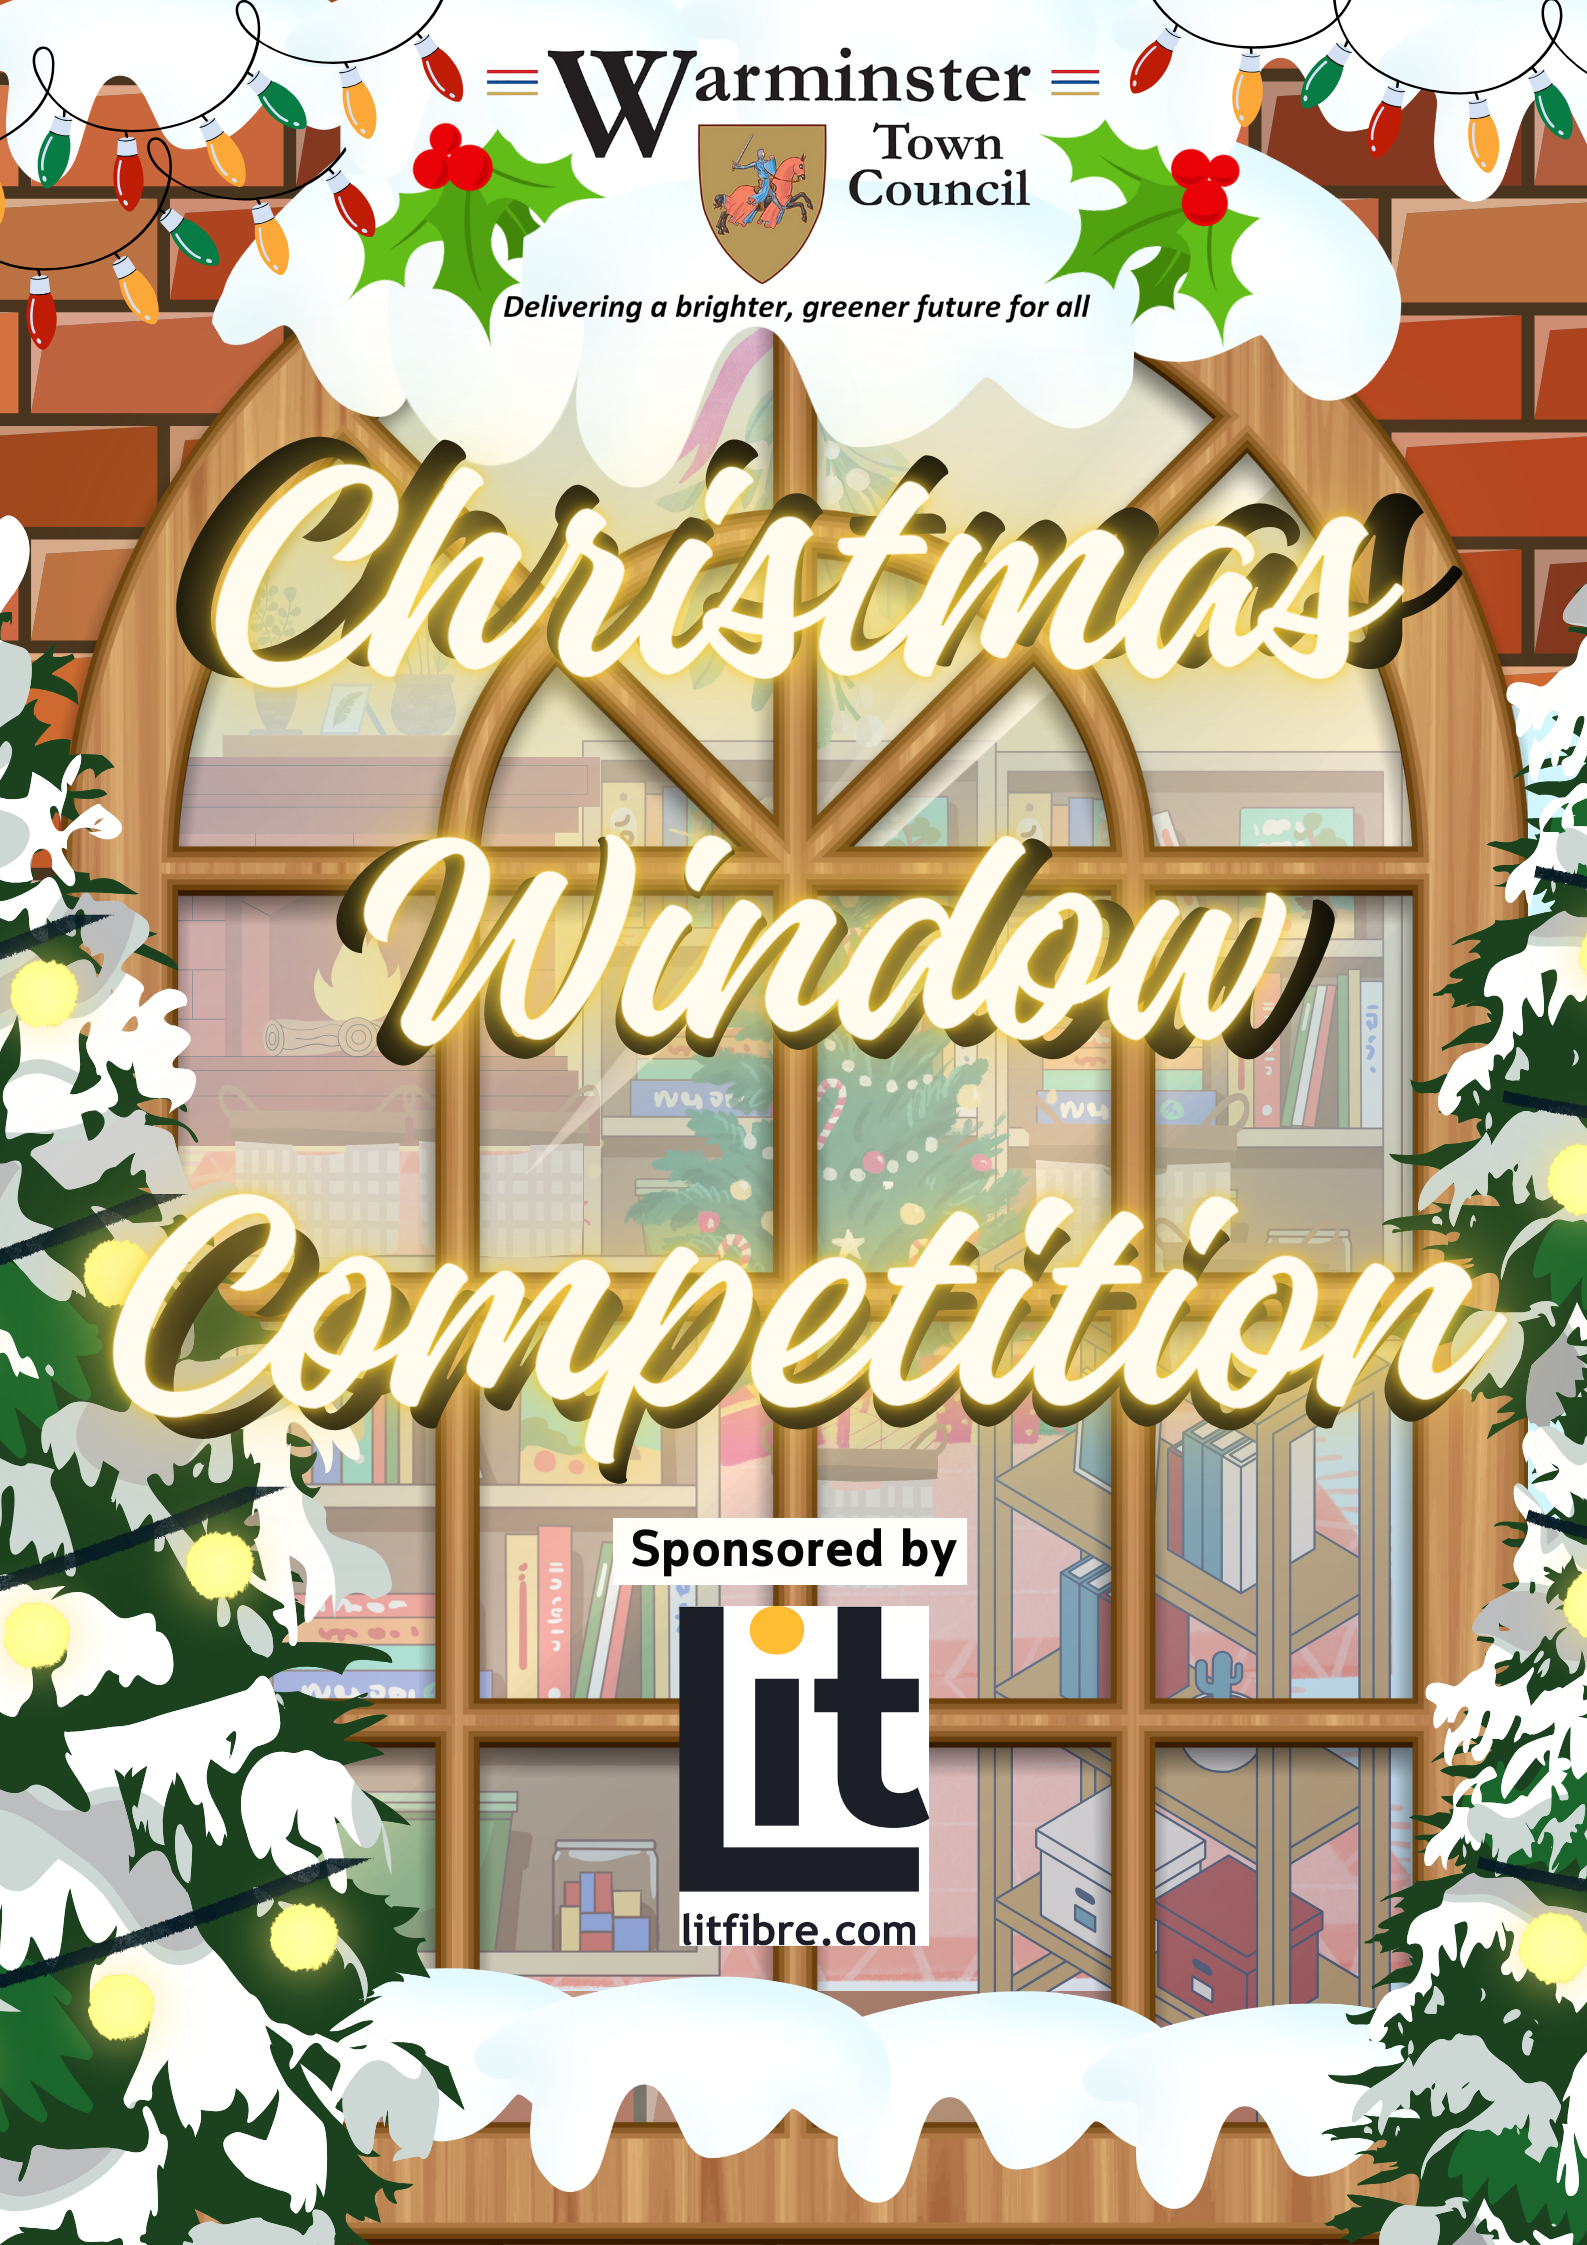 Warminster Town Council's Christmas Window Competition. Vote for your favourite up until Sunday 17th December